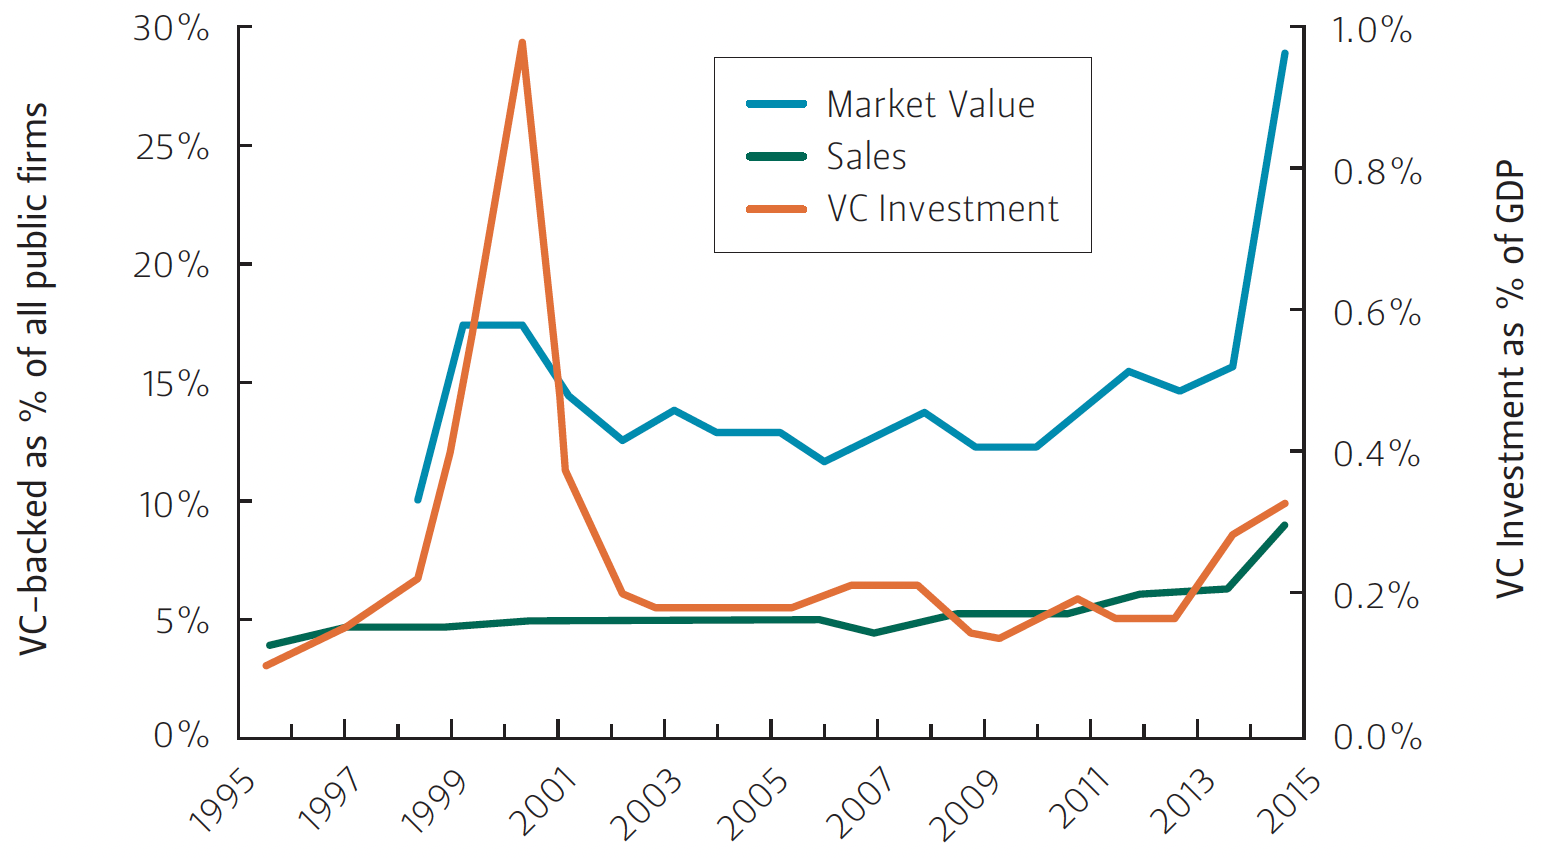 This graph compares market value, sales, and VC investment over time.